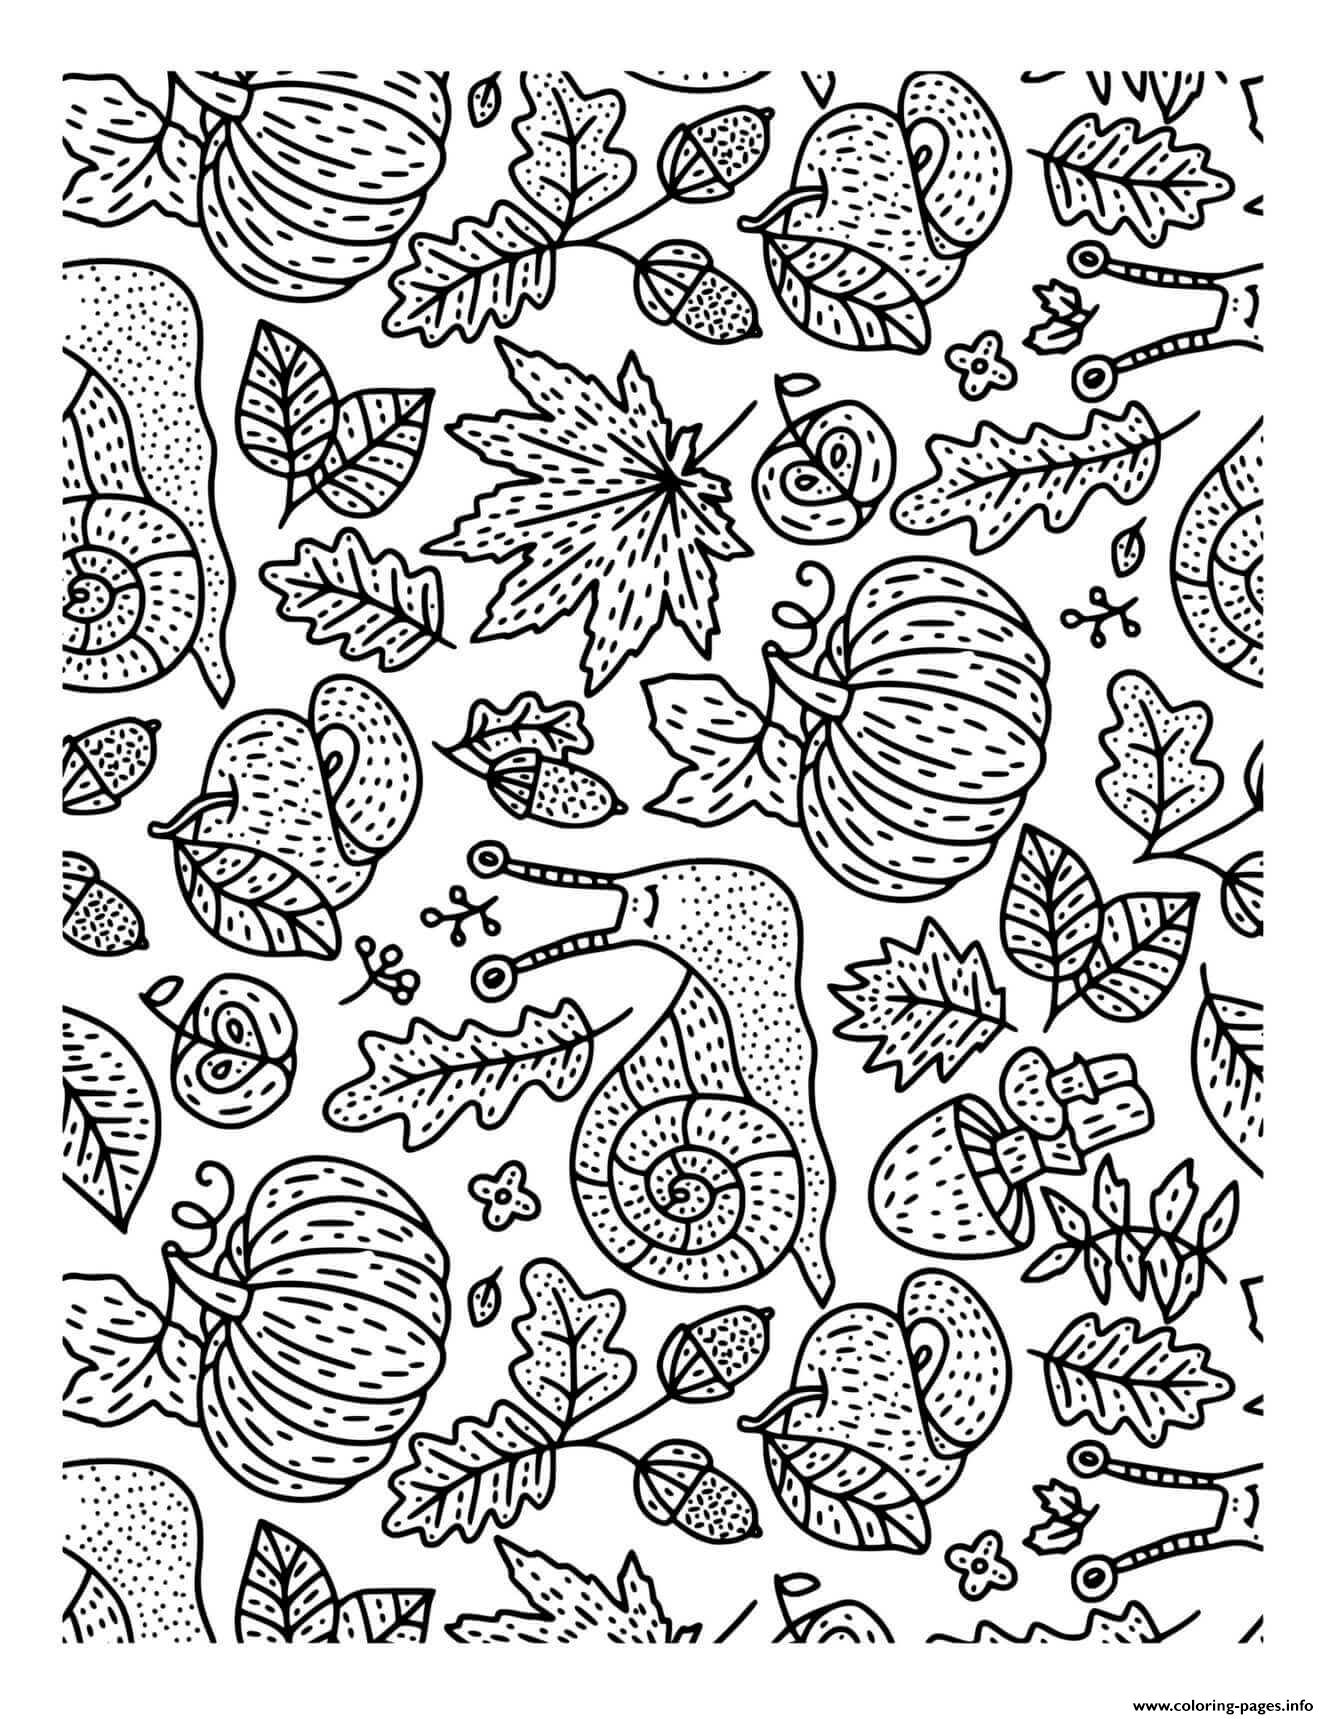 Fall Cute Fall Doodle Snail Leaves Mushrooms For Adults Coloring Pages